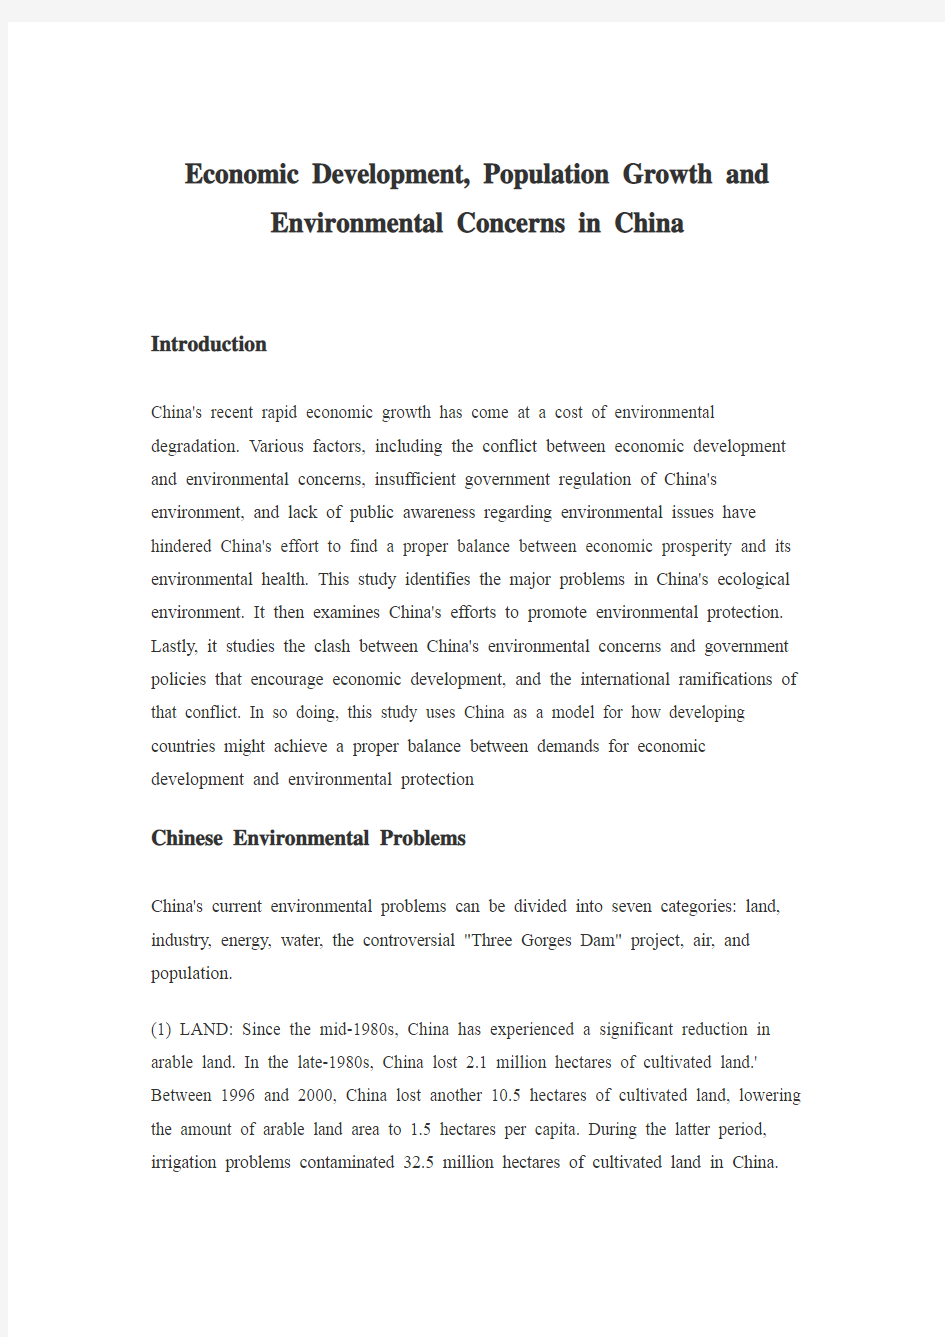 Economic Development,Population Growth and Environment Degredation in China